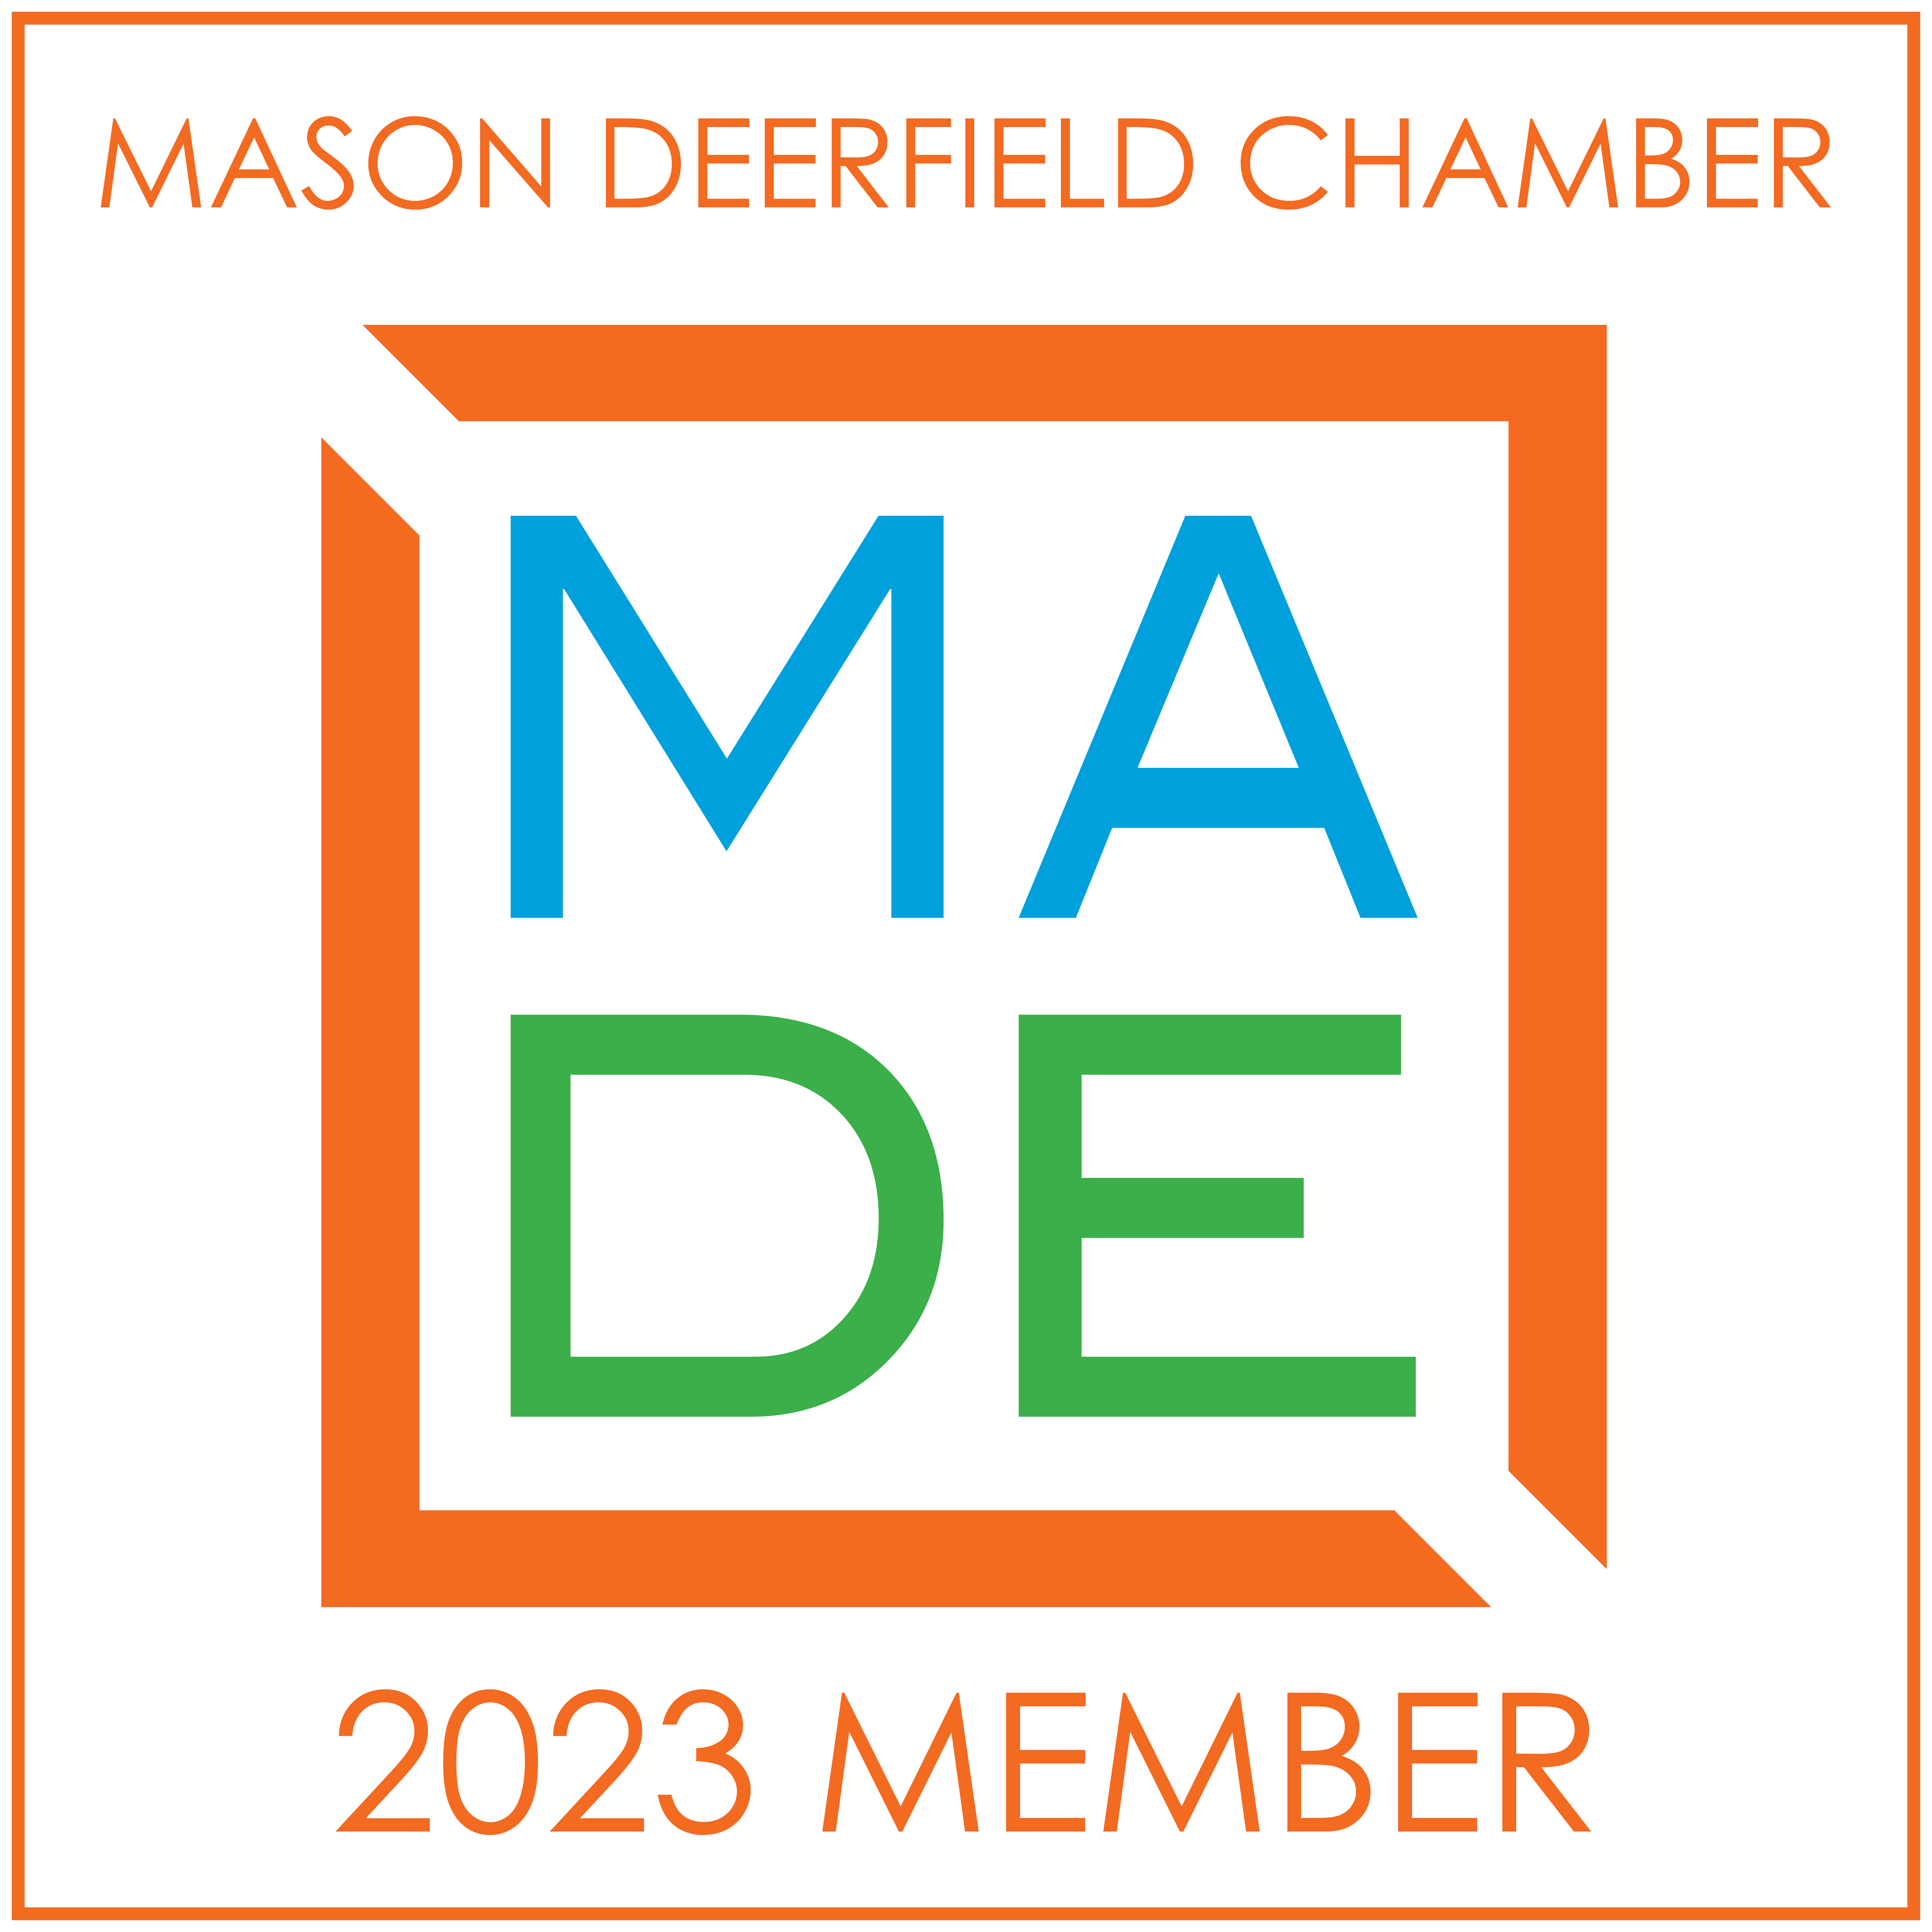 2023 membership decal for the Mason Deerfield Township Chamber of Commerce